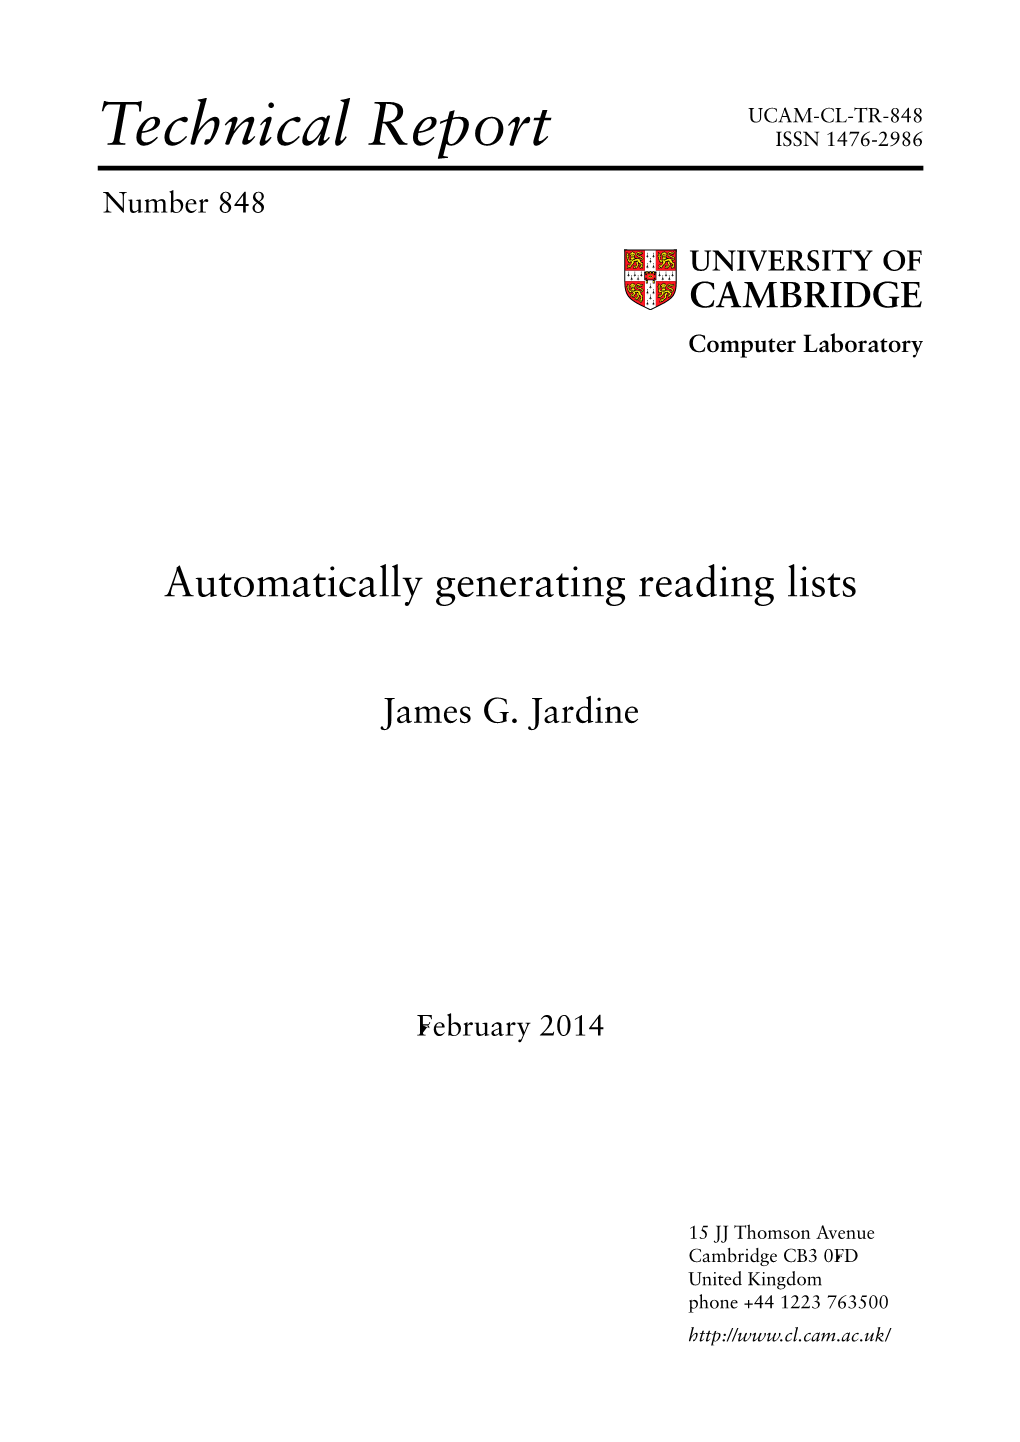 Automatically Generating Reading Lists